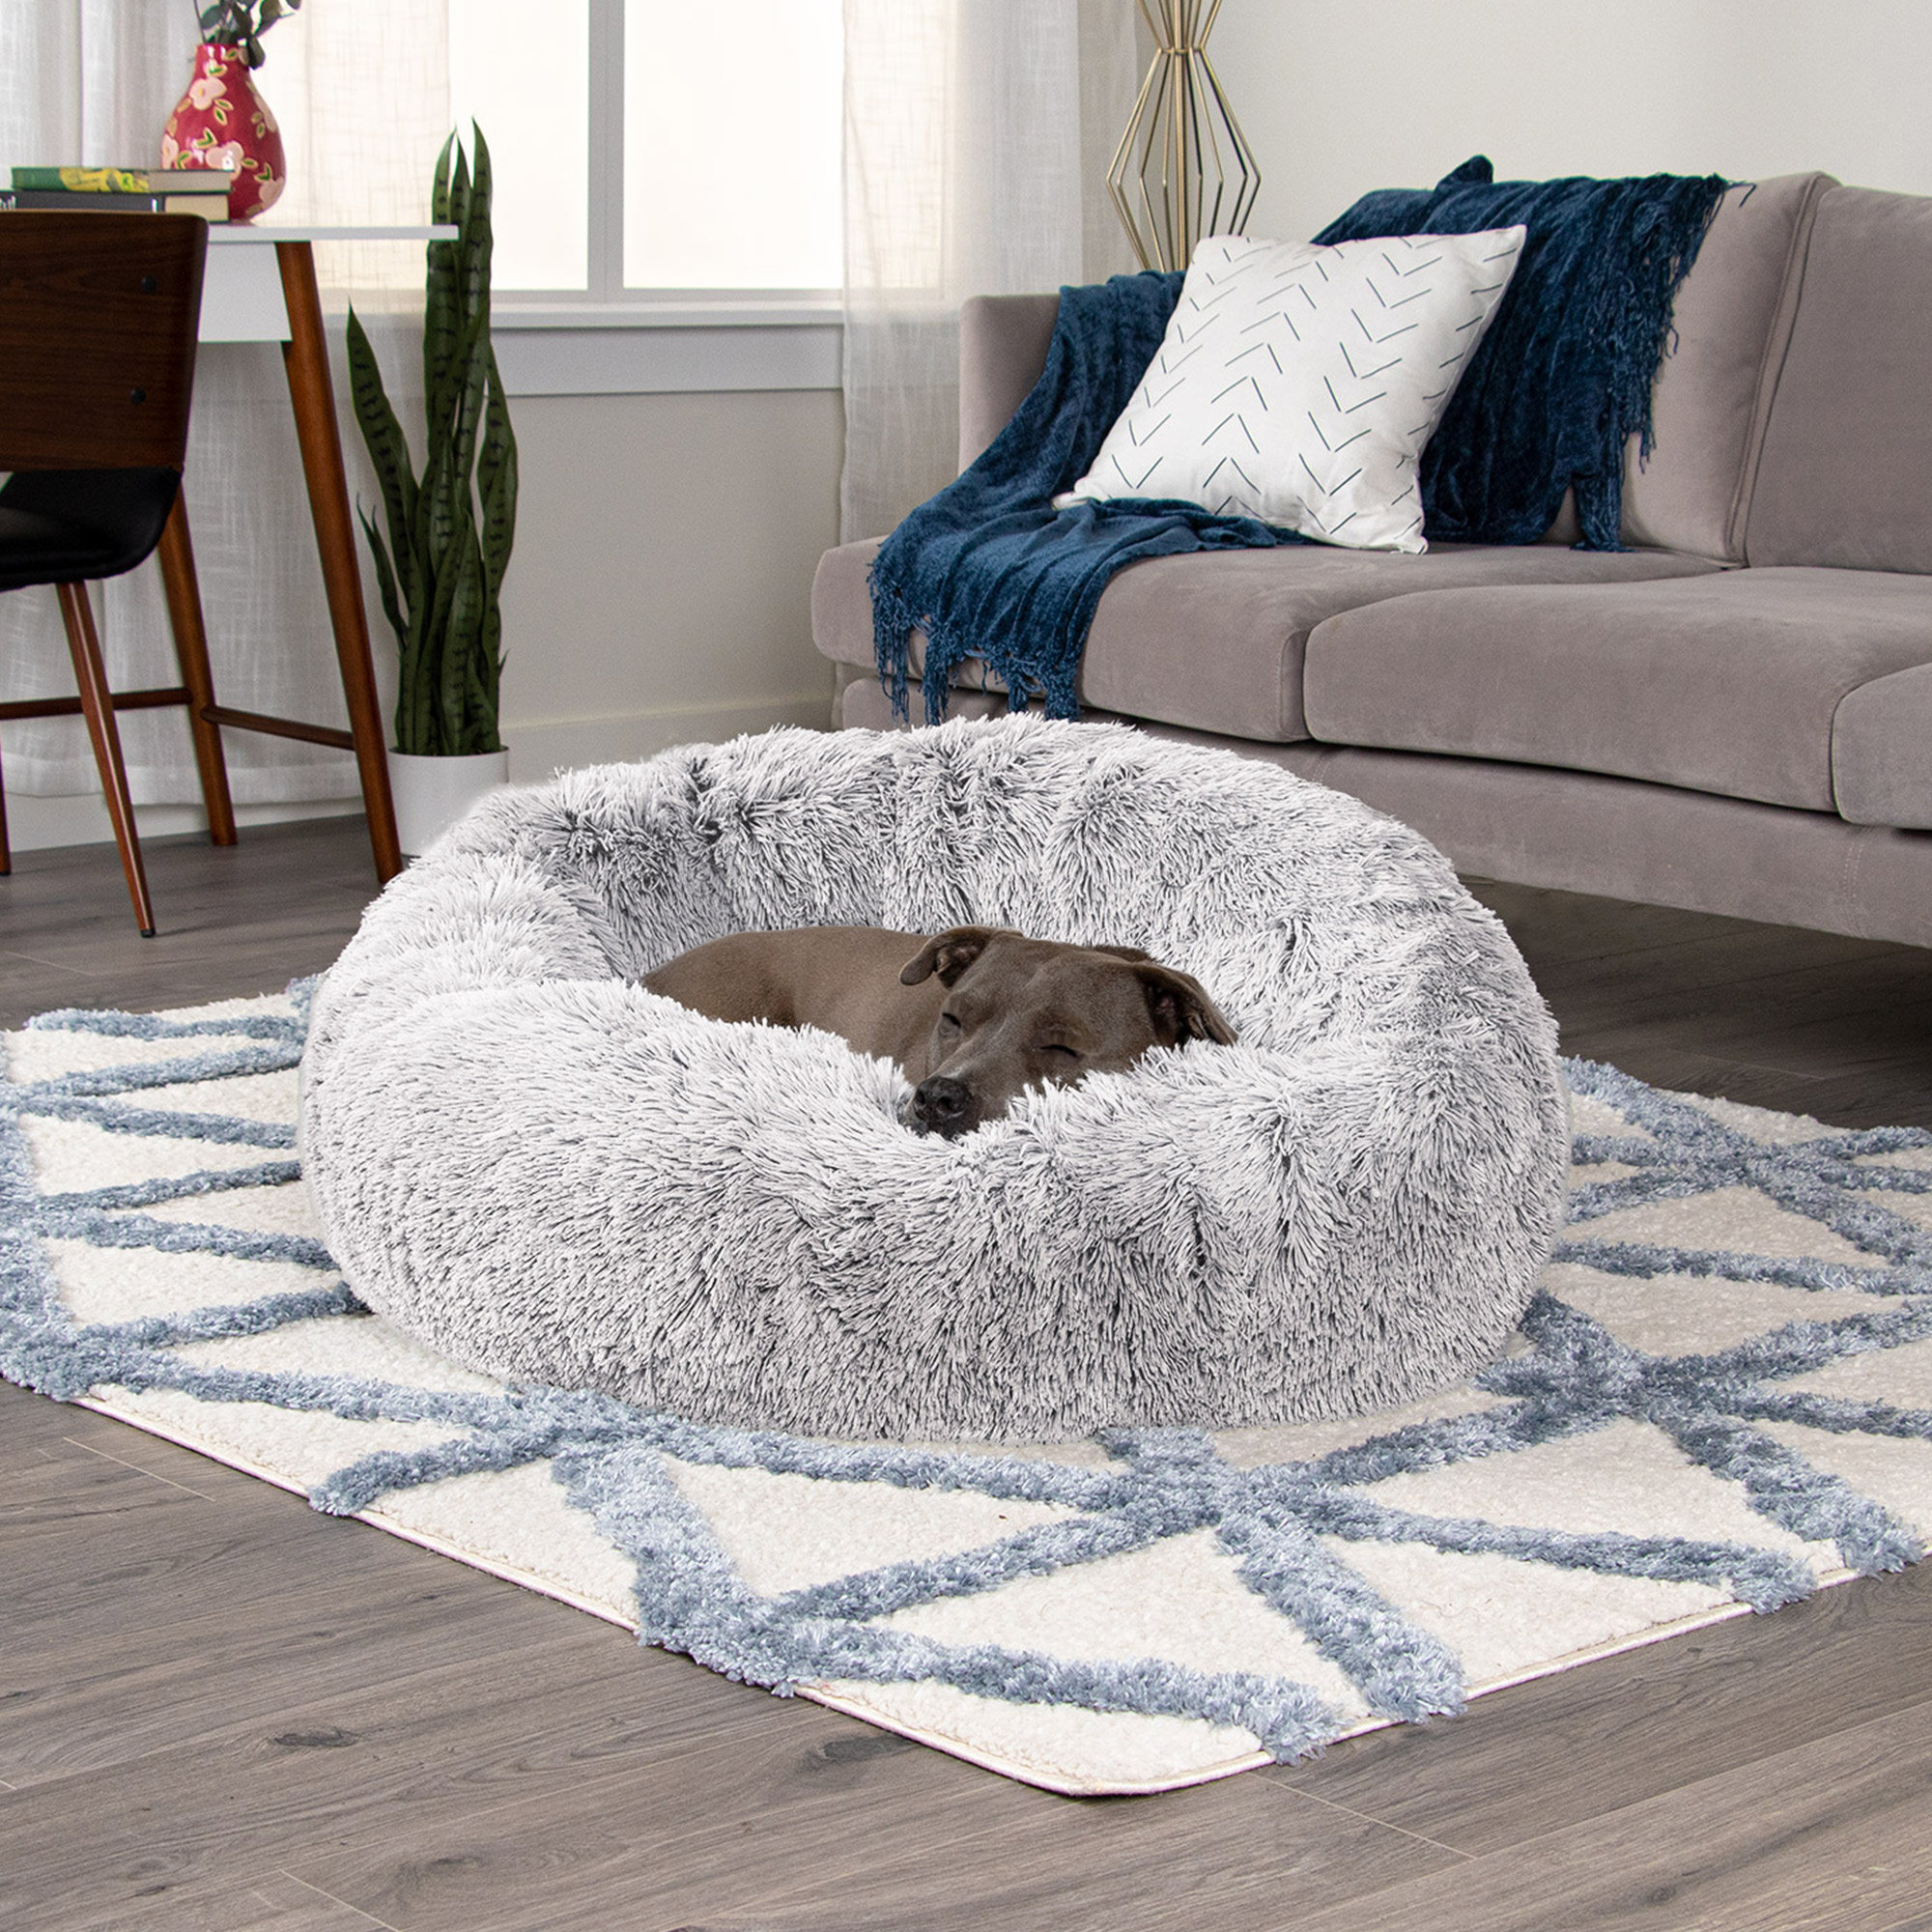 Giant Donut, Comfy Donut Seat With Changable Cover